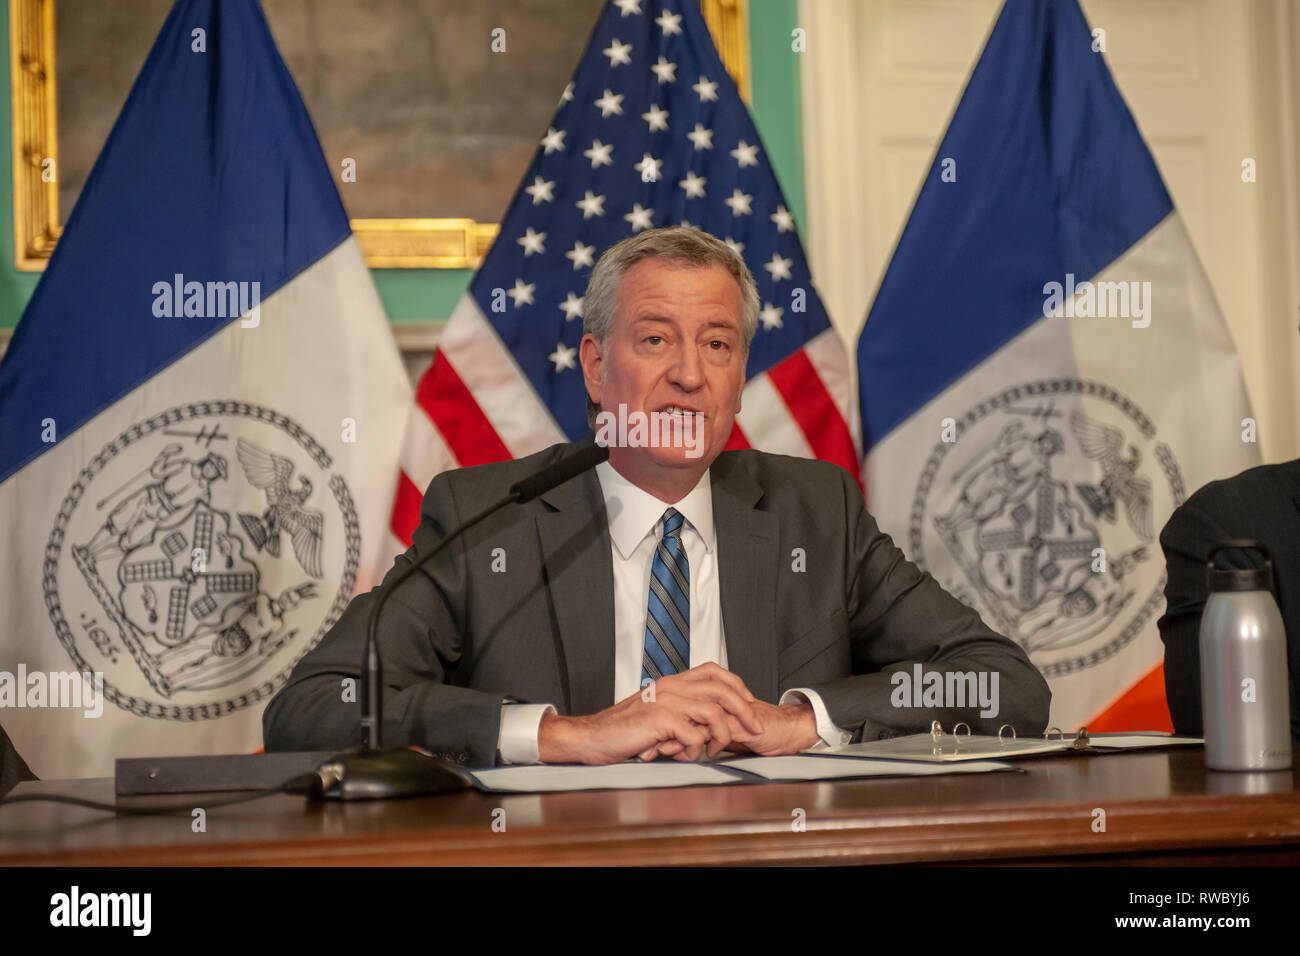 New York, USA. 05th Mar, 2019. New York Mayor Bill de Blasio at a bill signing in New York City Hall on Monday, March 4, 2019. The mayor signed into law legislation that creates a pilot program in East New York (Intro. 1004-A) that creates a pathway to the legalization of basement and cellar apartments, known in the vernacular as 'illegal 3's'. The basement apartments have to comply or be renovated to comply with the modified building code. ( © Richard B. Levine) Credit: Richard Levine/Alamy Live News Stock Photo